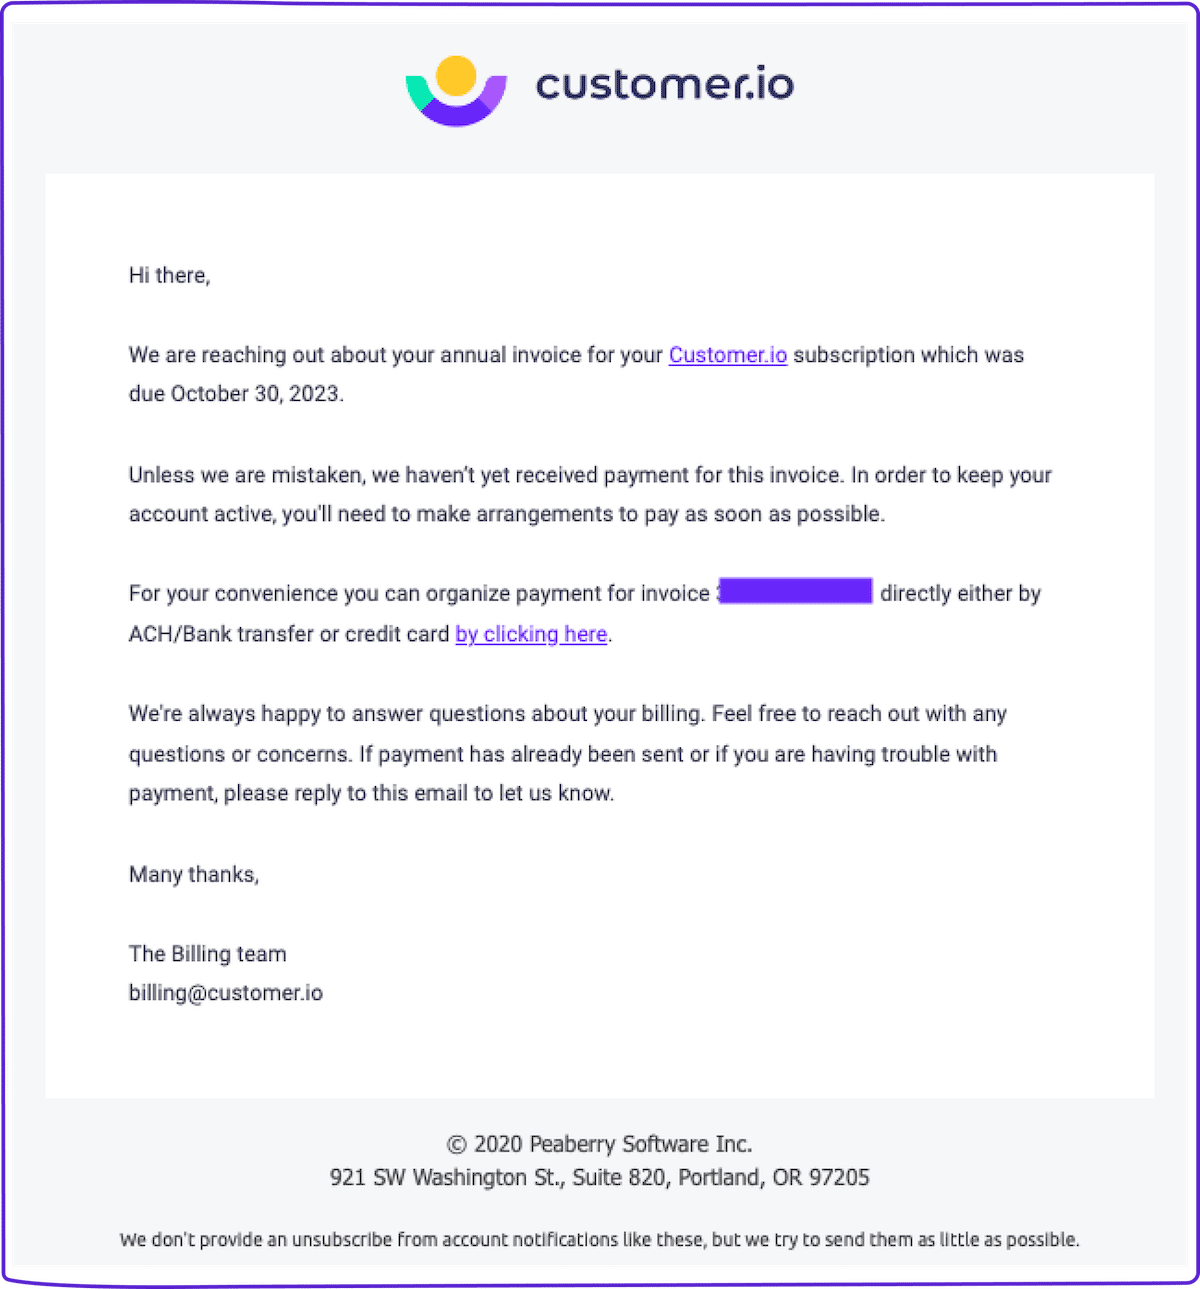 Dunning email template: Invoice overdue reminder email from Customer.io